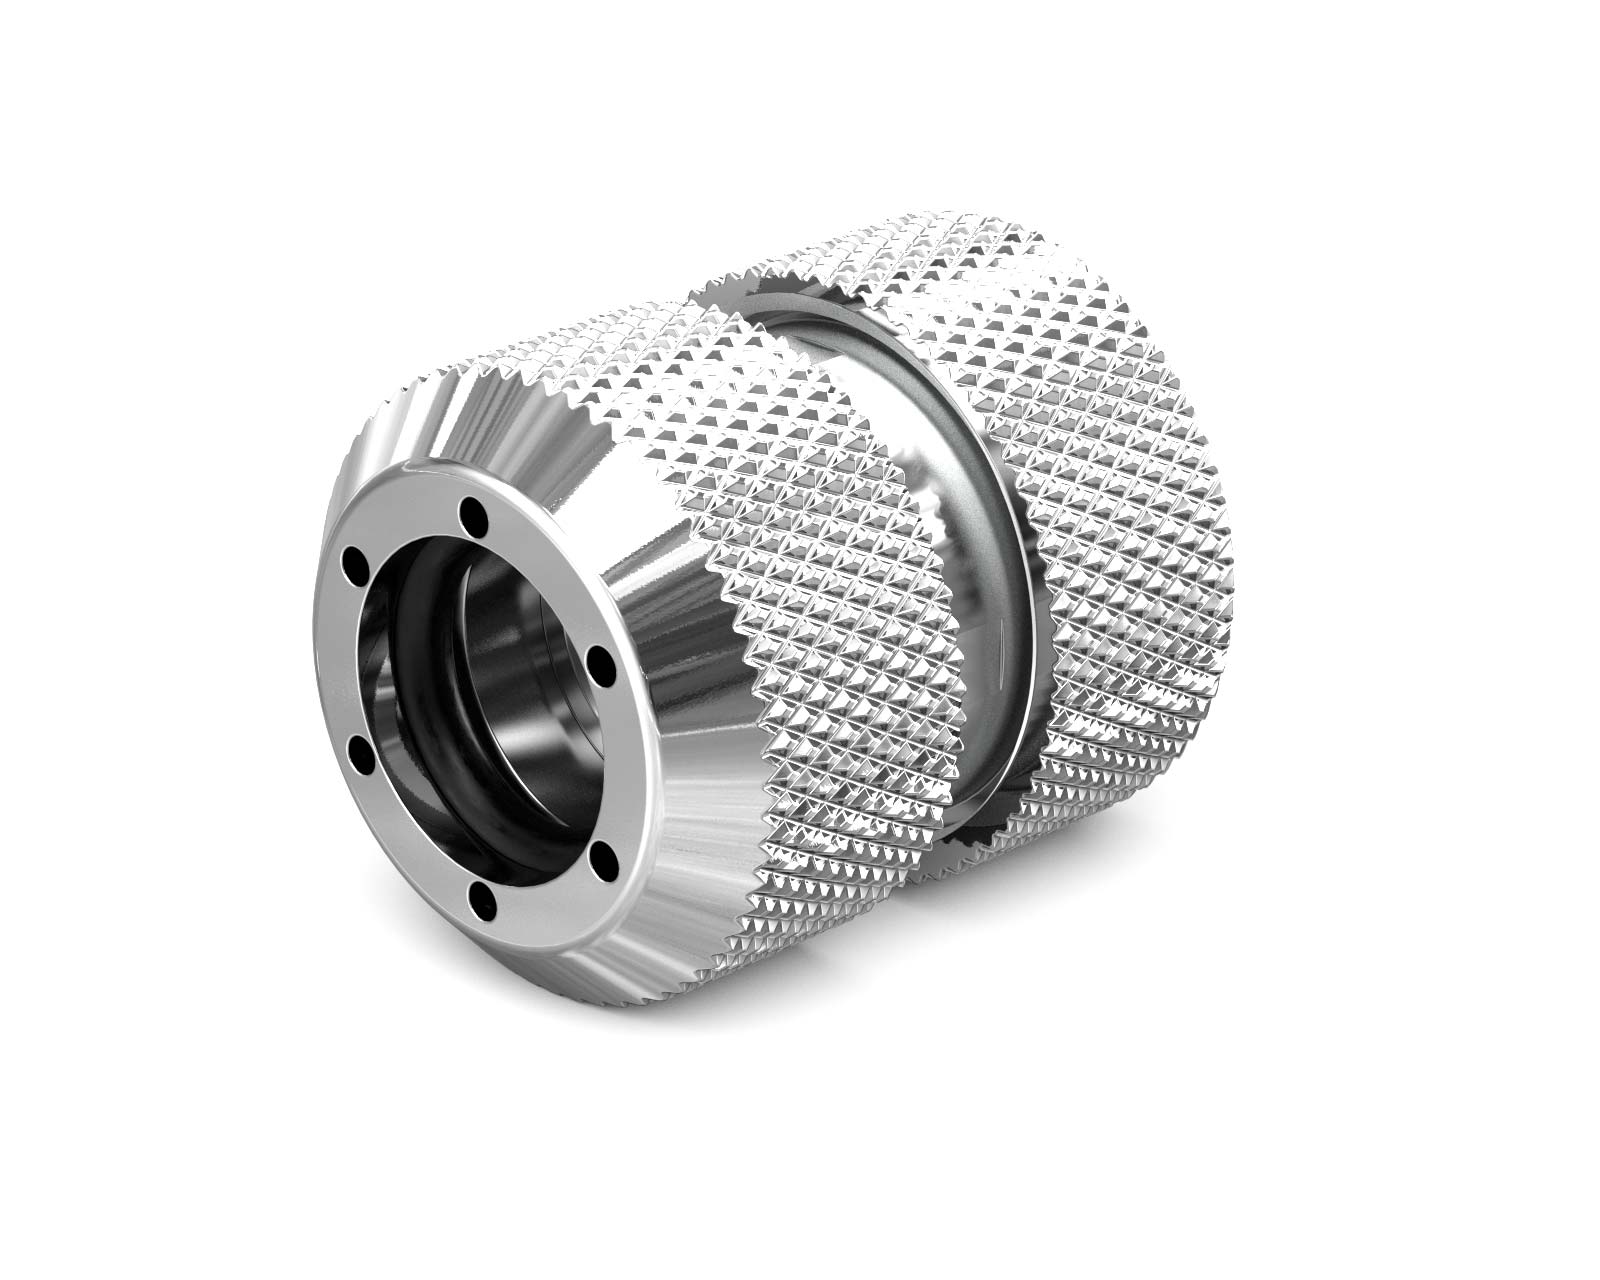 PrimoChill 1/2in. Rigid RevolverSX Series Coupler Fitting - PrimoChill - KEEPING IT COOL Silver Nickel